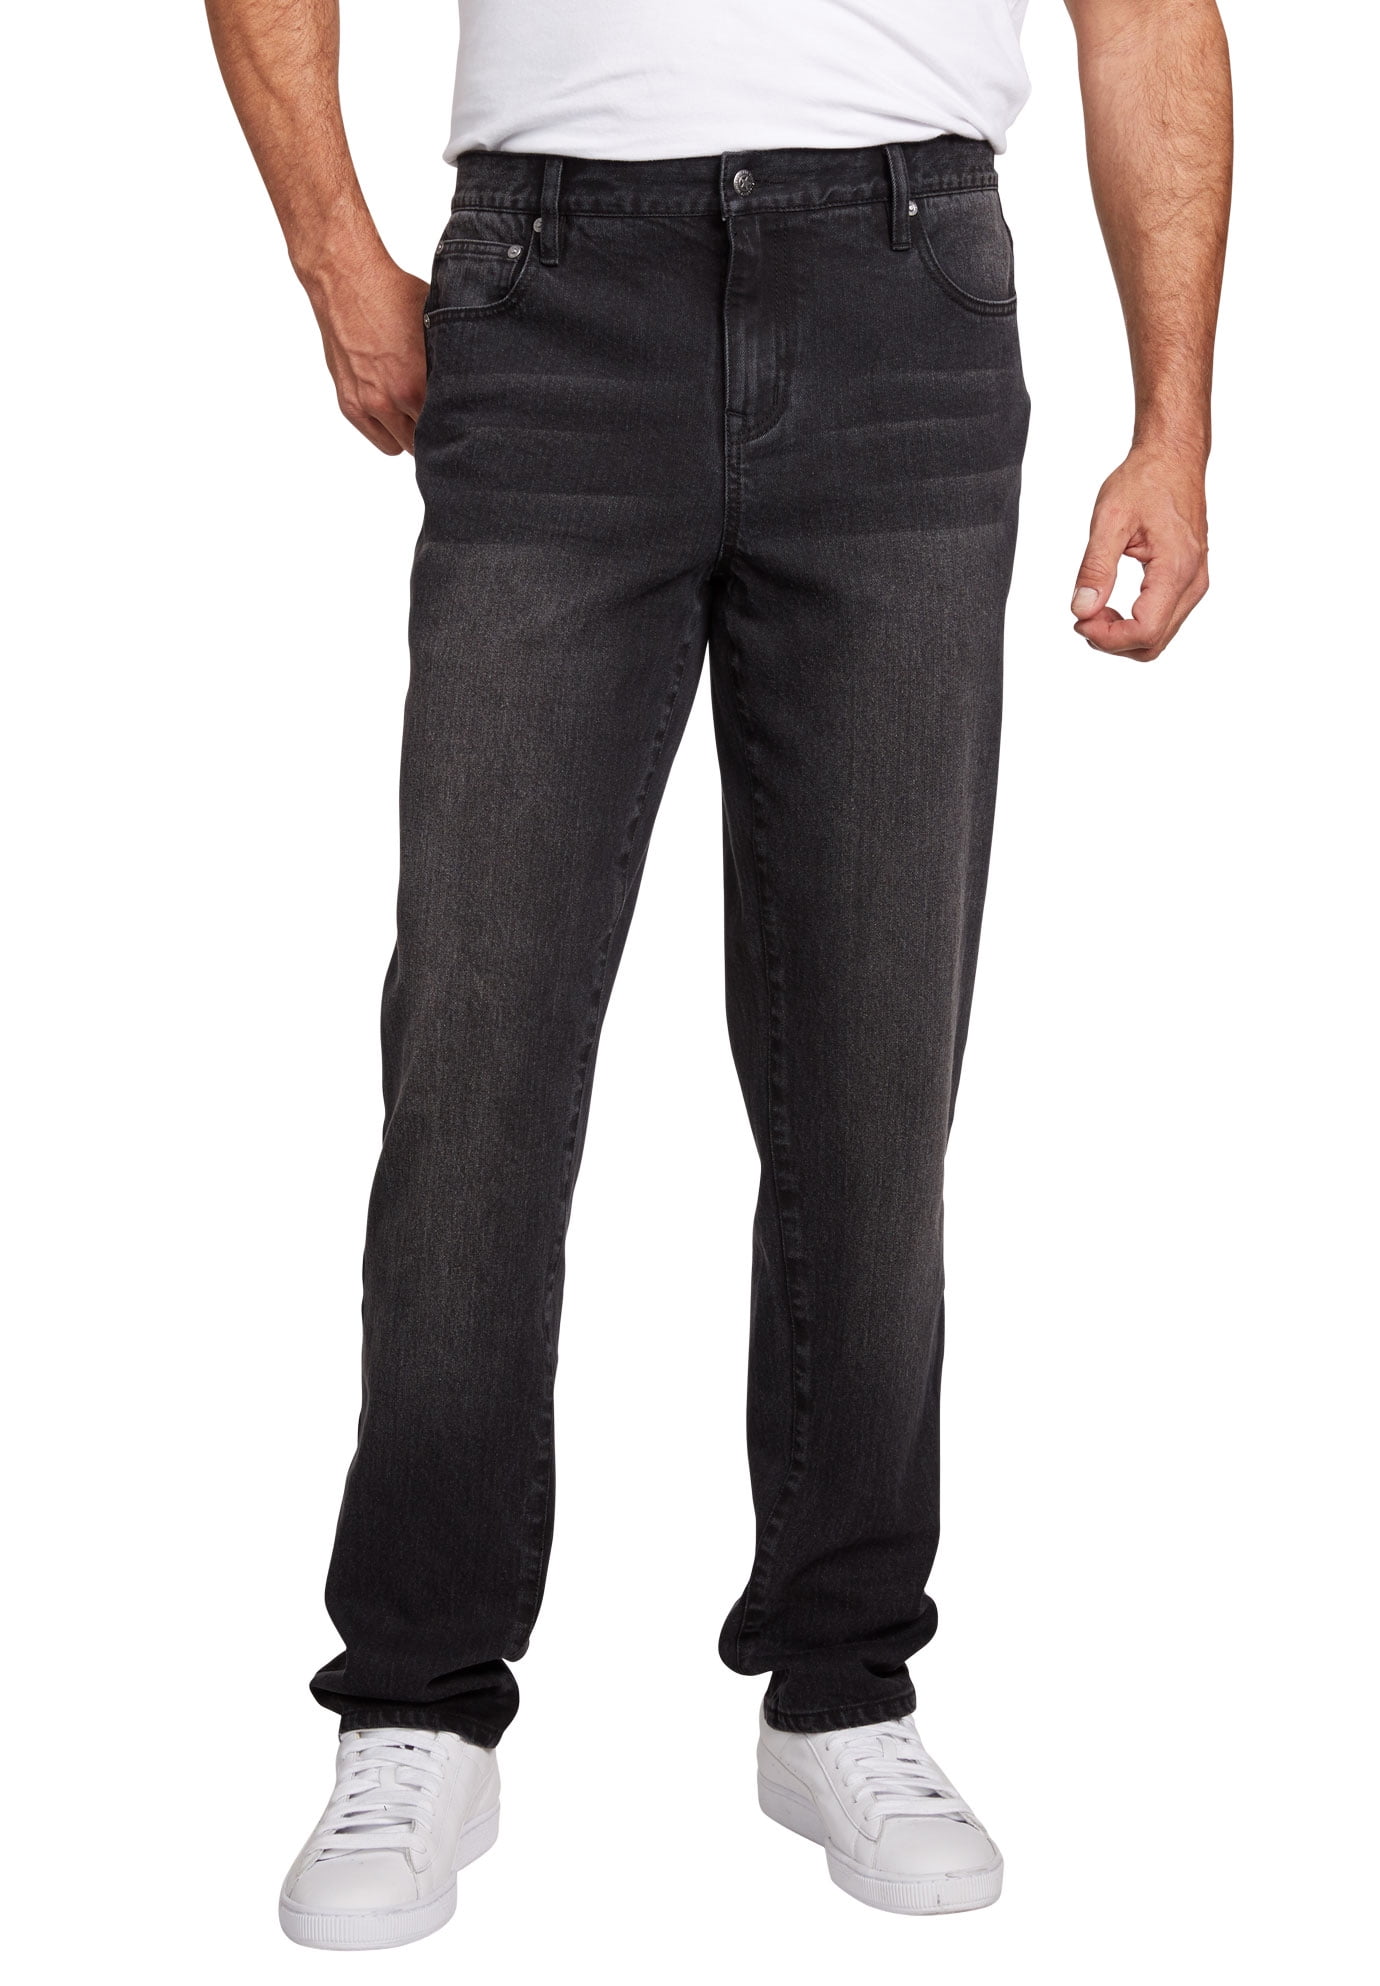 Liberty Blues Men's Big & Tall ™ Relaxed-Fit Stretch 5-Pocket Jeans ...